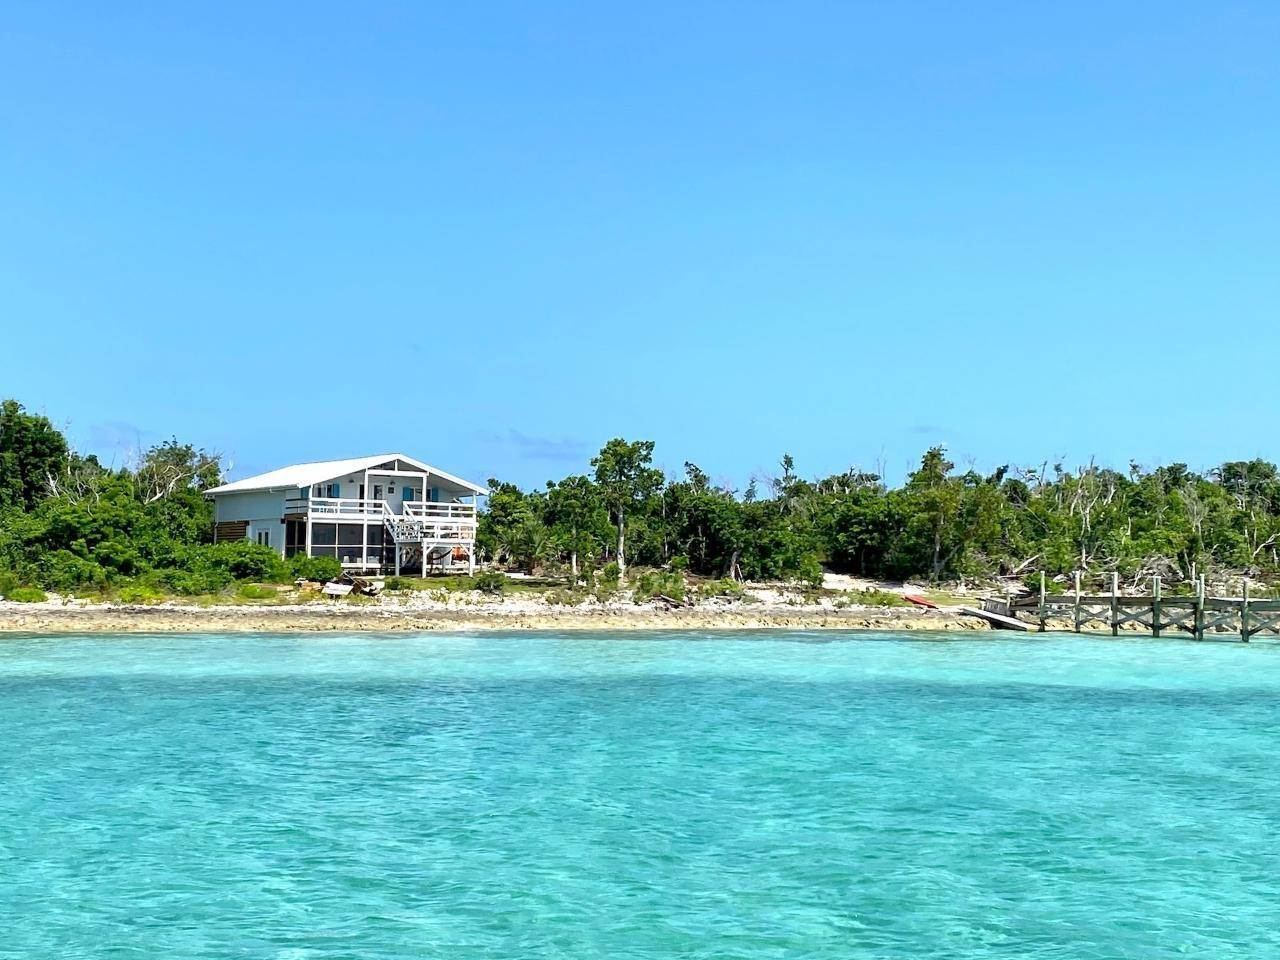 Single Family Homes for Sale at Lubbers Quarters, Abaco Bahamas